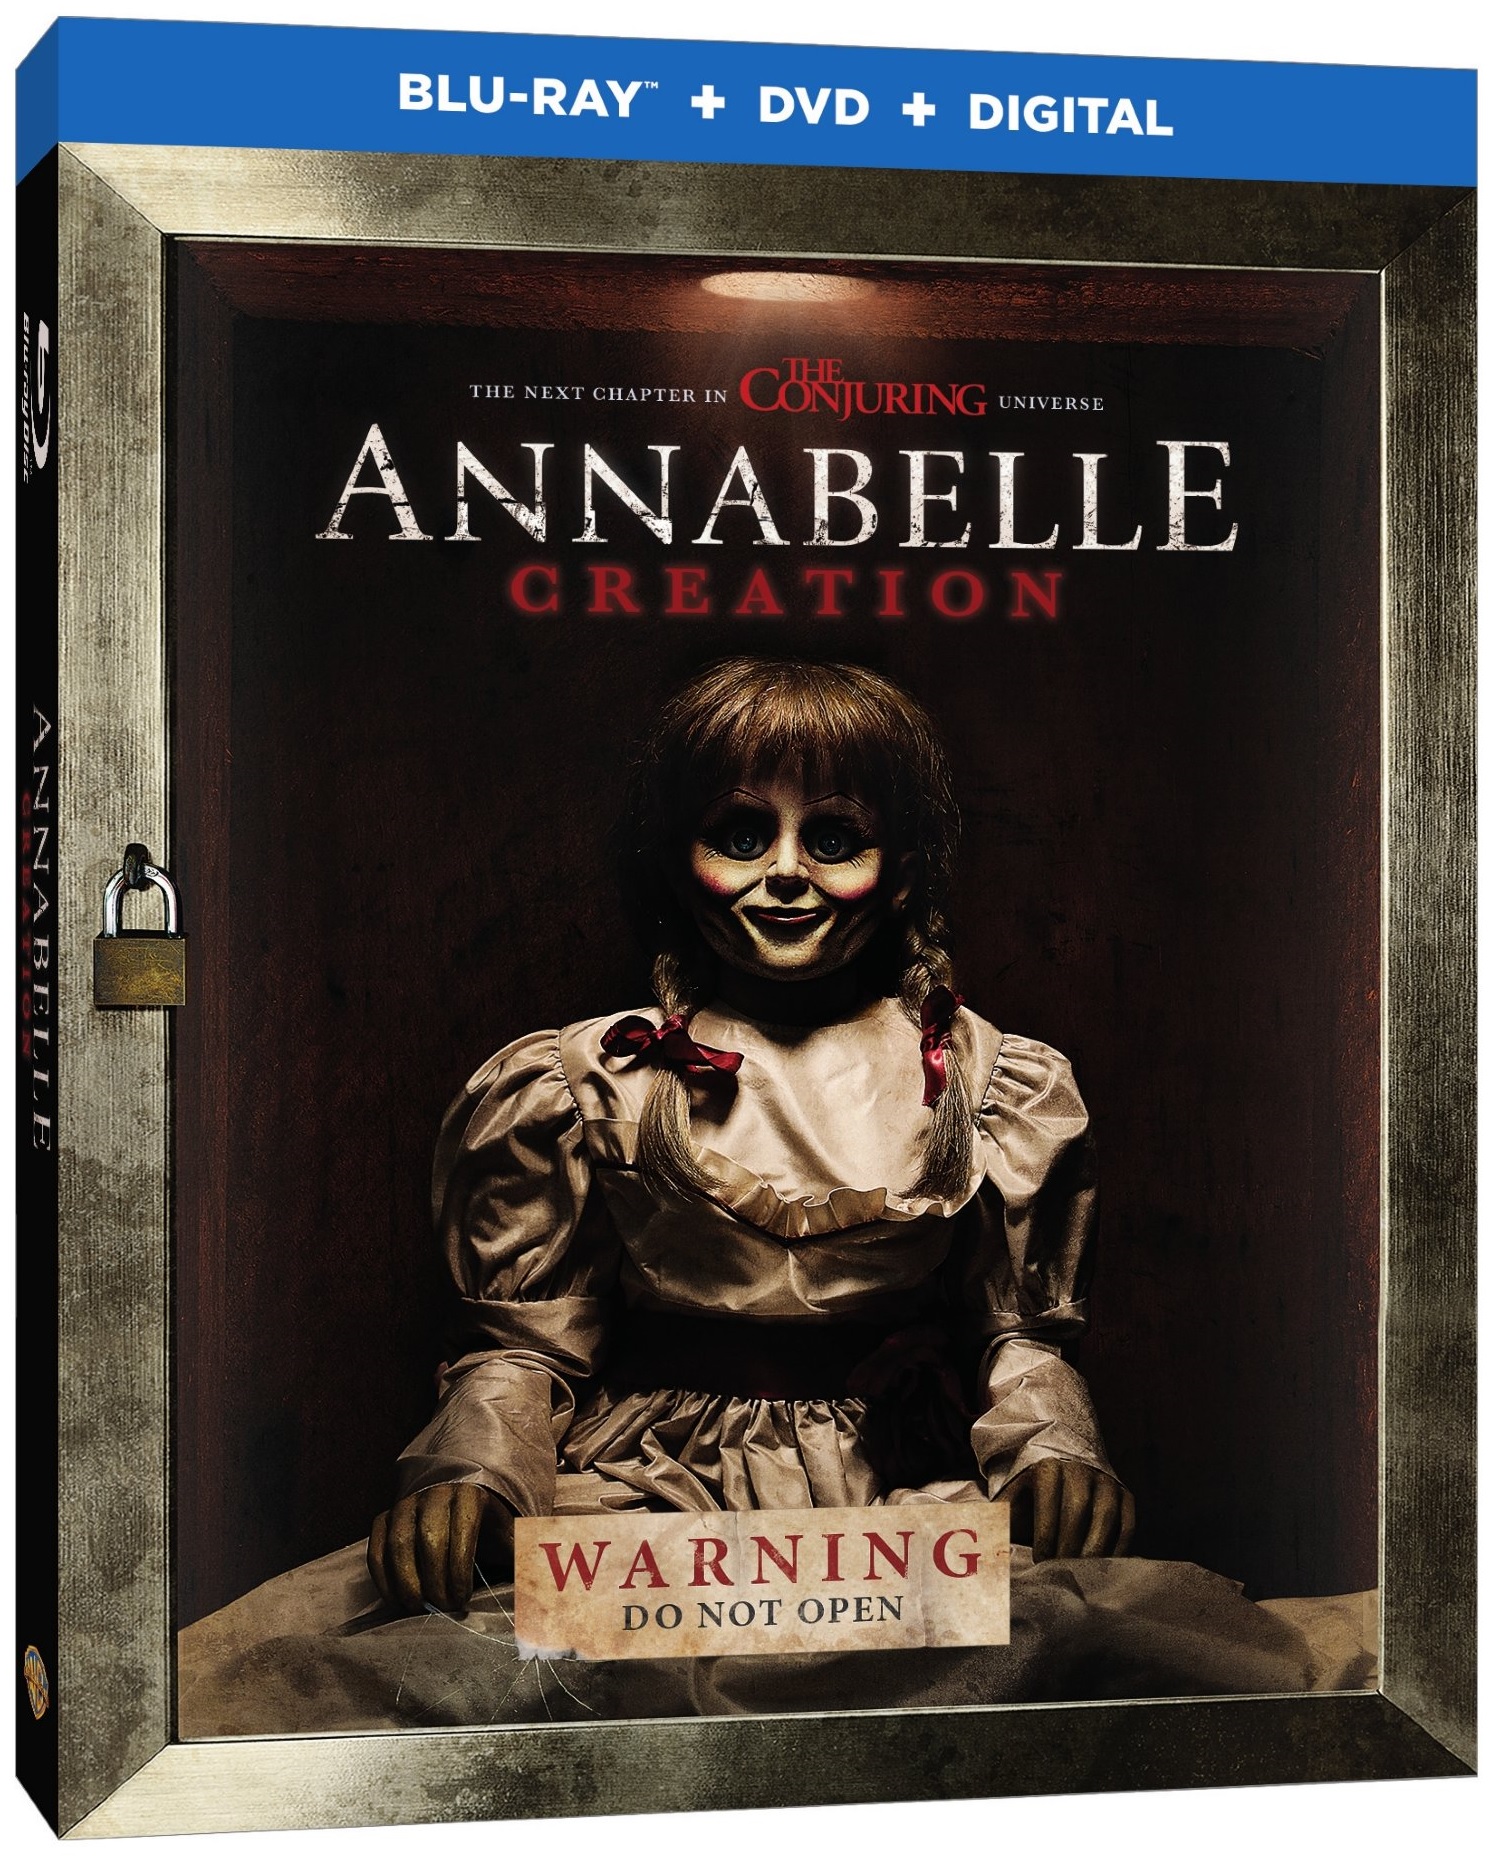 Annabelle Creation Blu-ray Cover